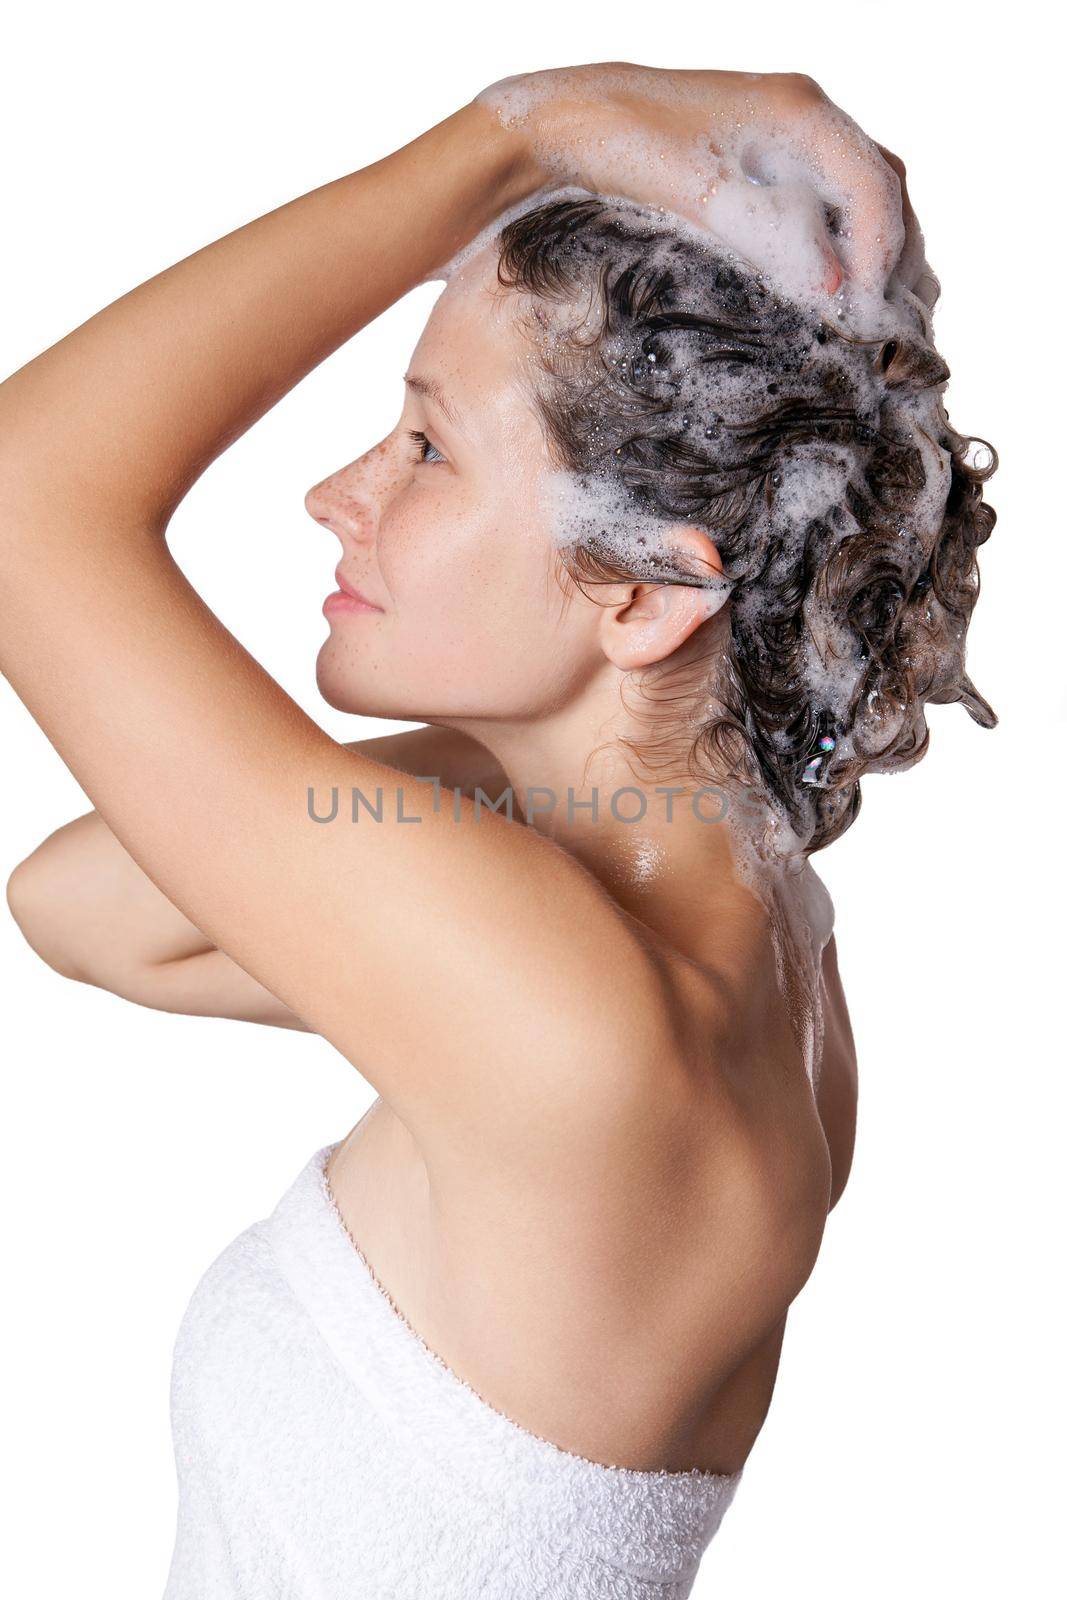 Beautiful woman taking a shower and shampooing her hair. washing hair with Shampoo. studio shot isolated on white background.